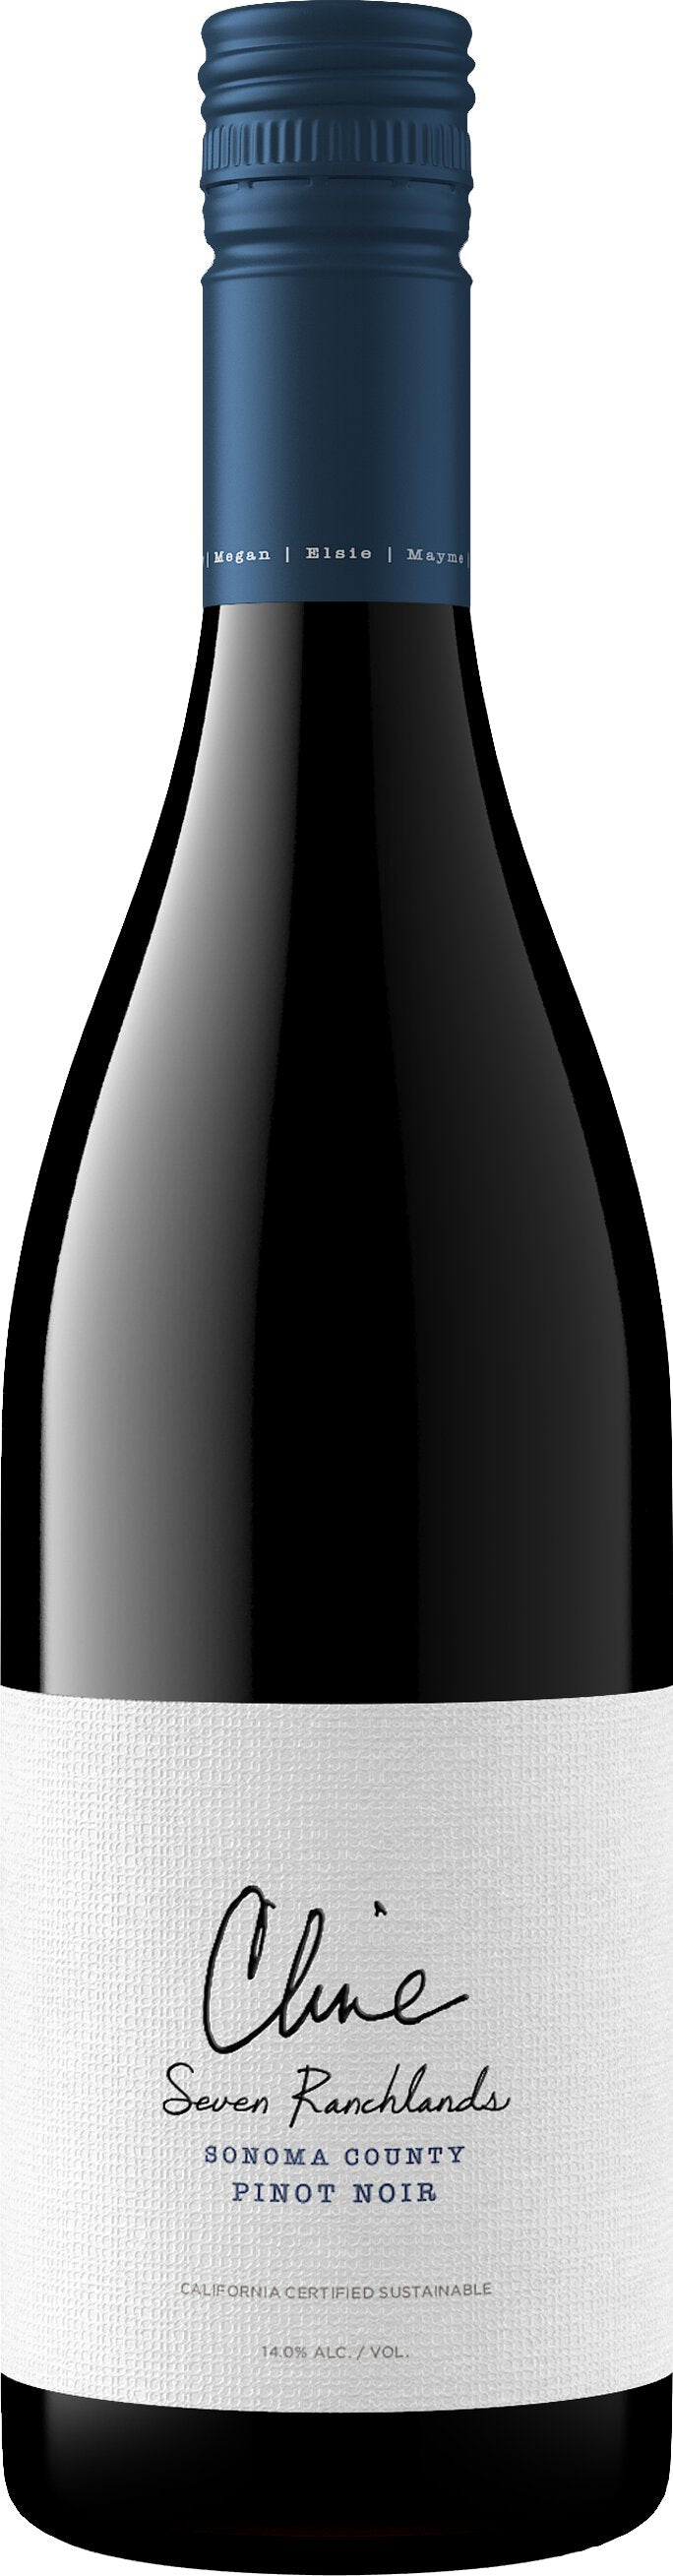 Cline Seven Ranchlands Sonoma County Pinot Noir